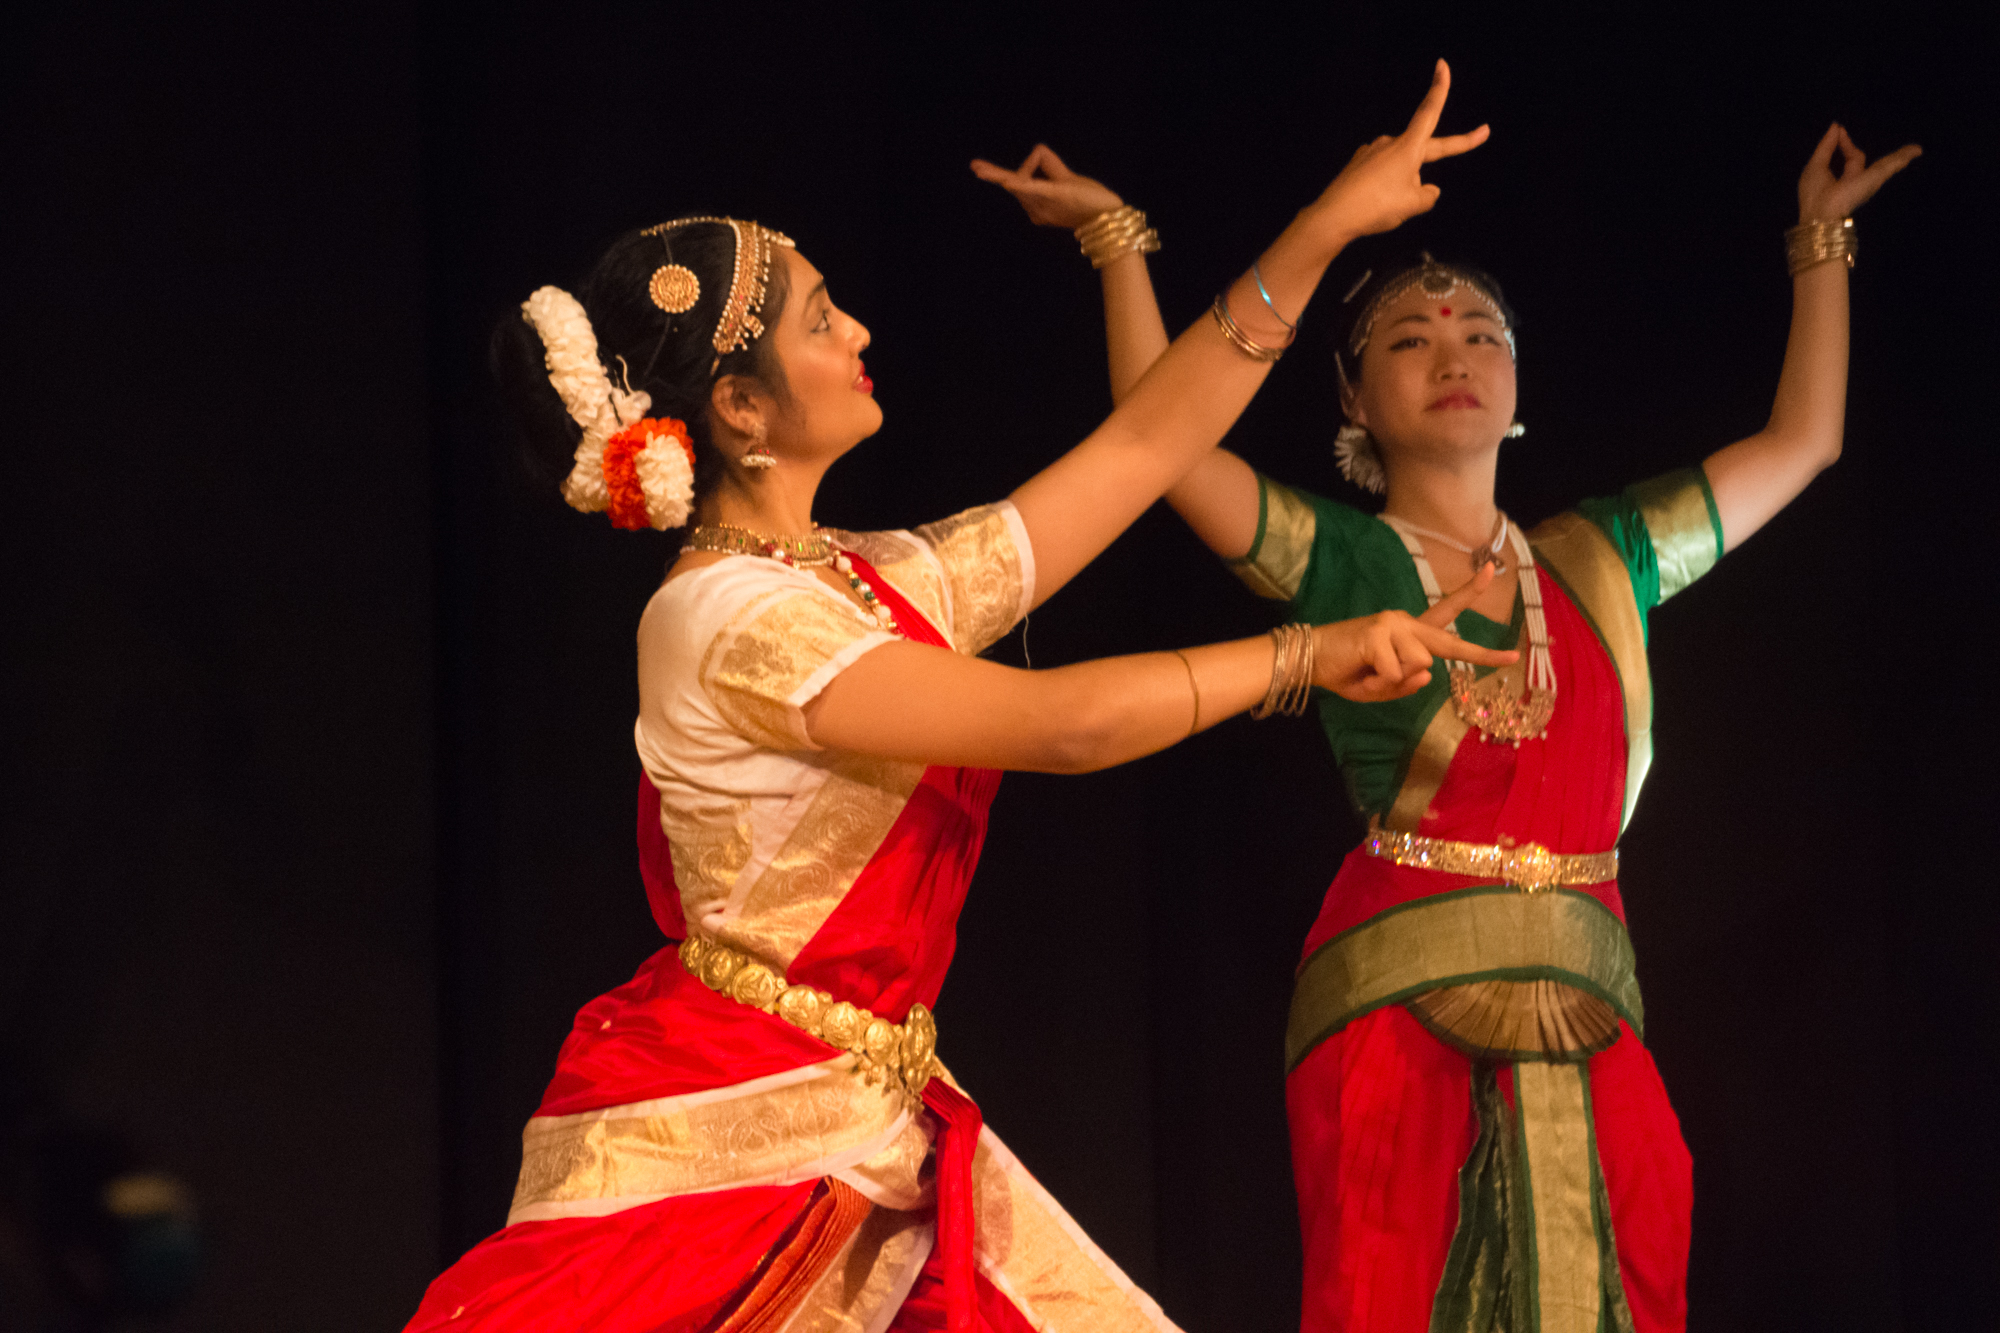 Two women performing with colorful dresses